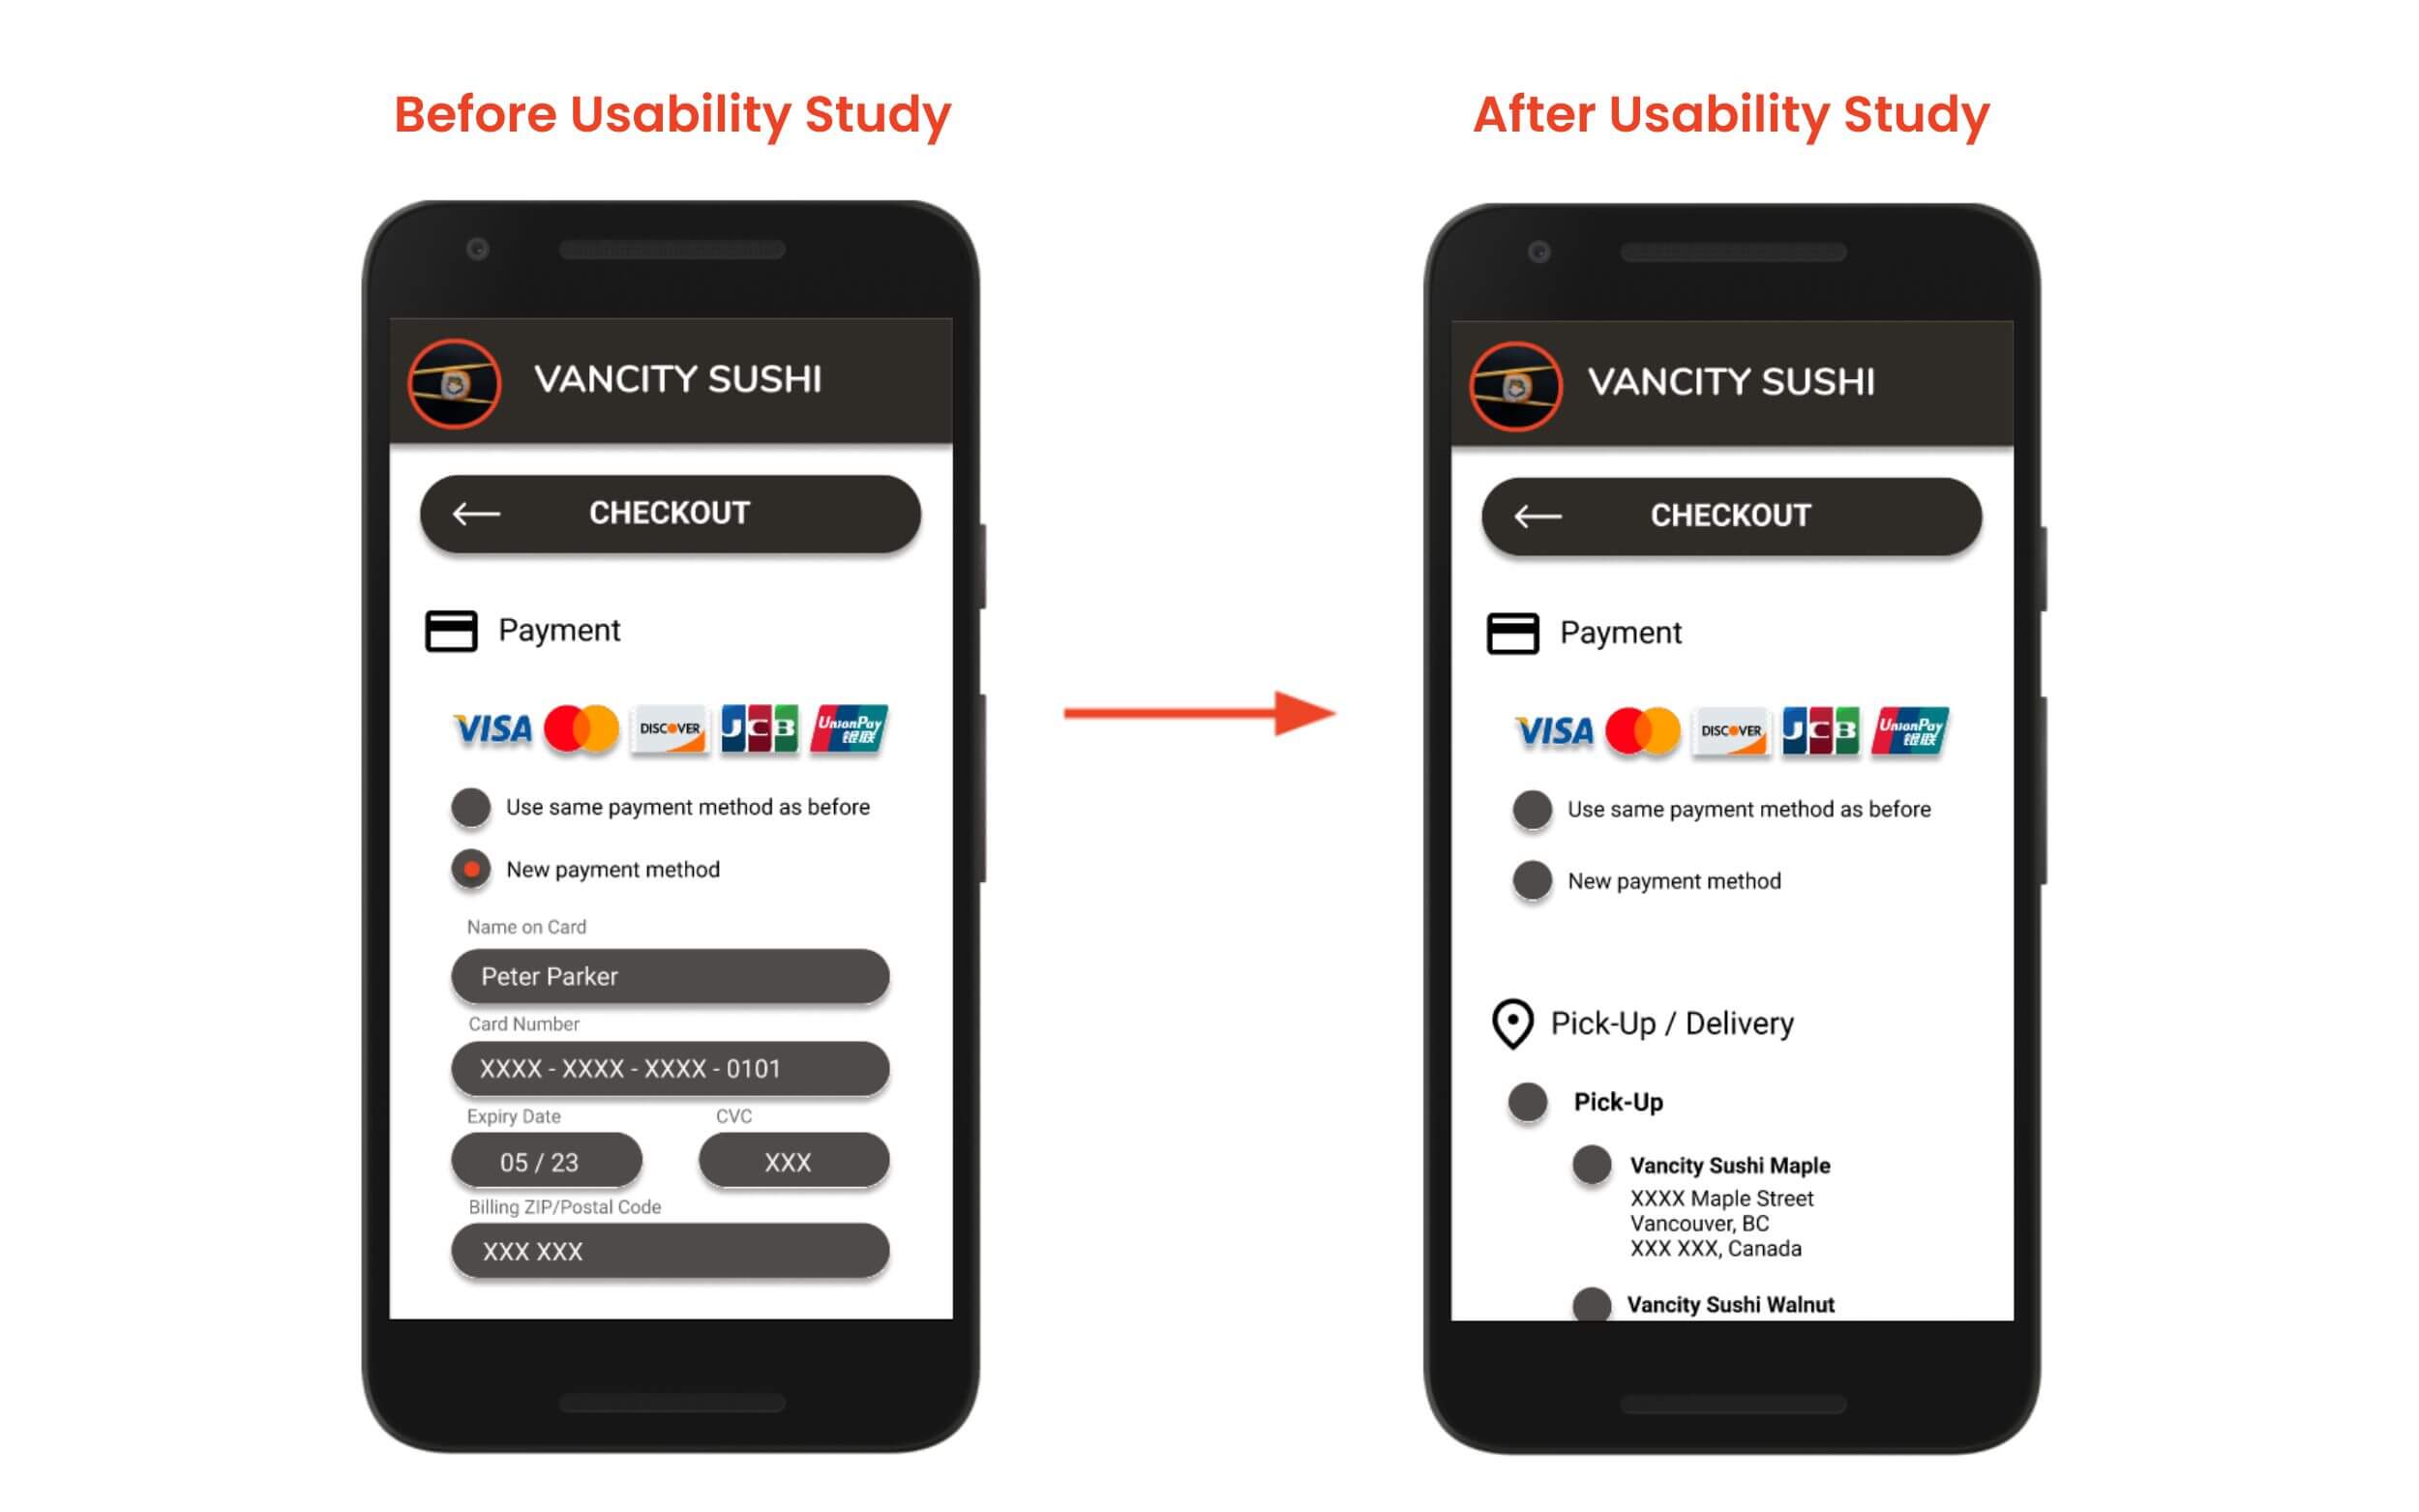 Before and After screenshots of Vancity Sushi's payment screen with the payment fields expanded after each step rather than all expanded to reduce excessive scrolling.